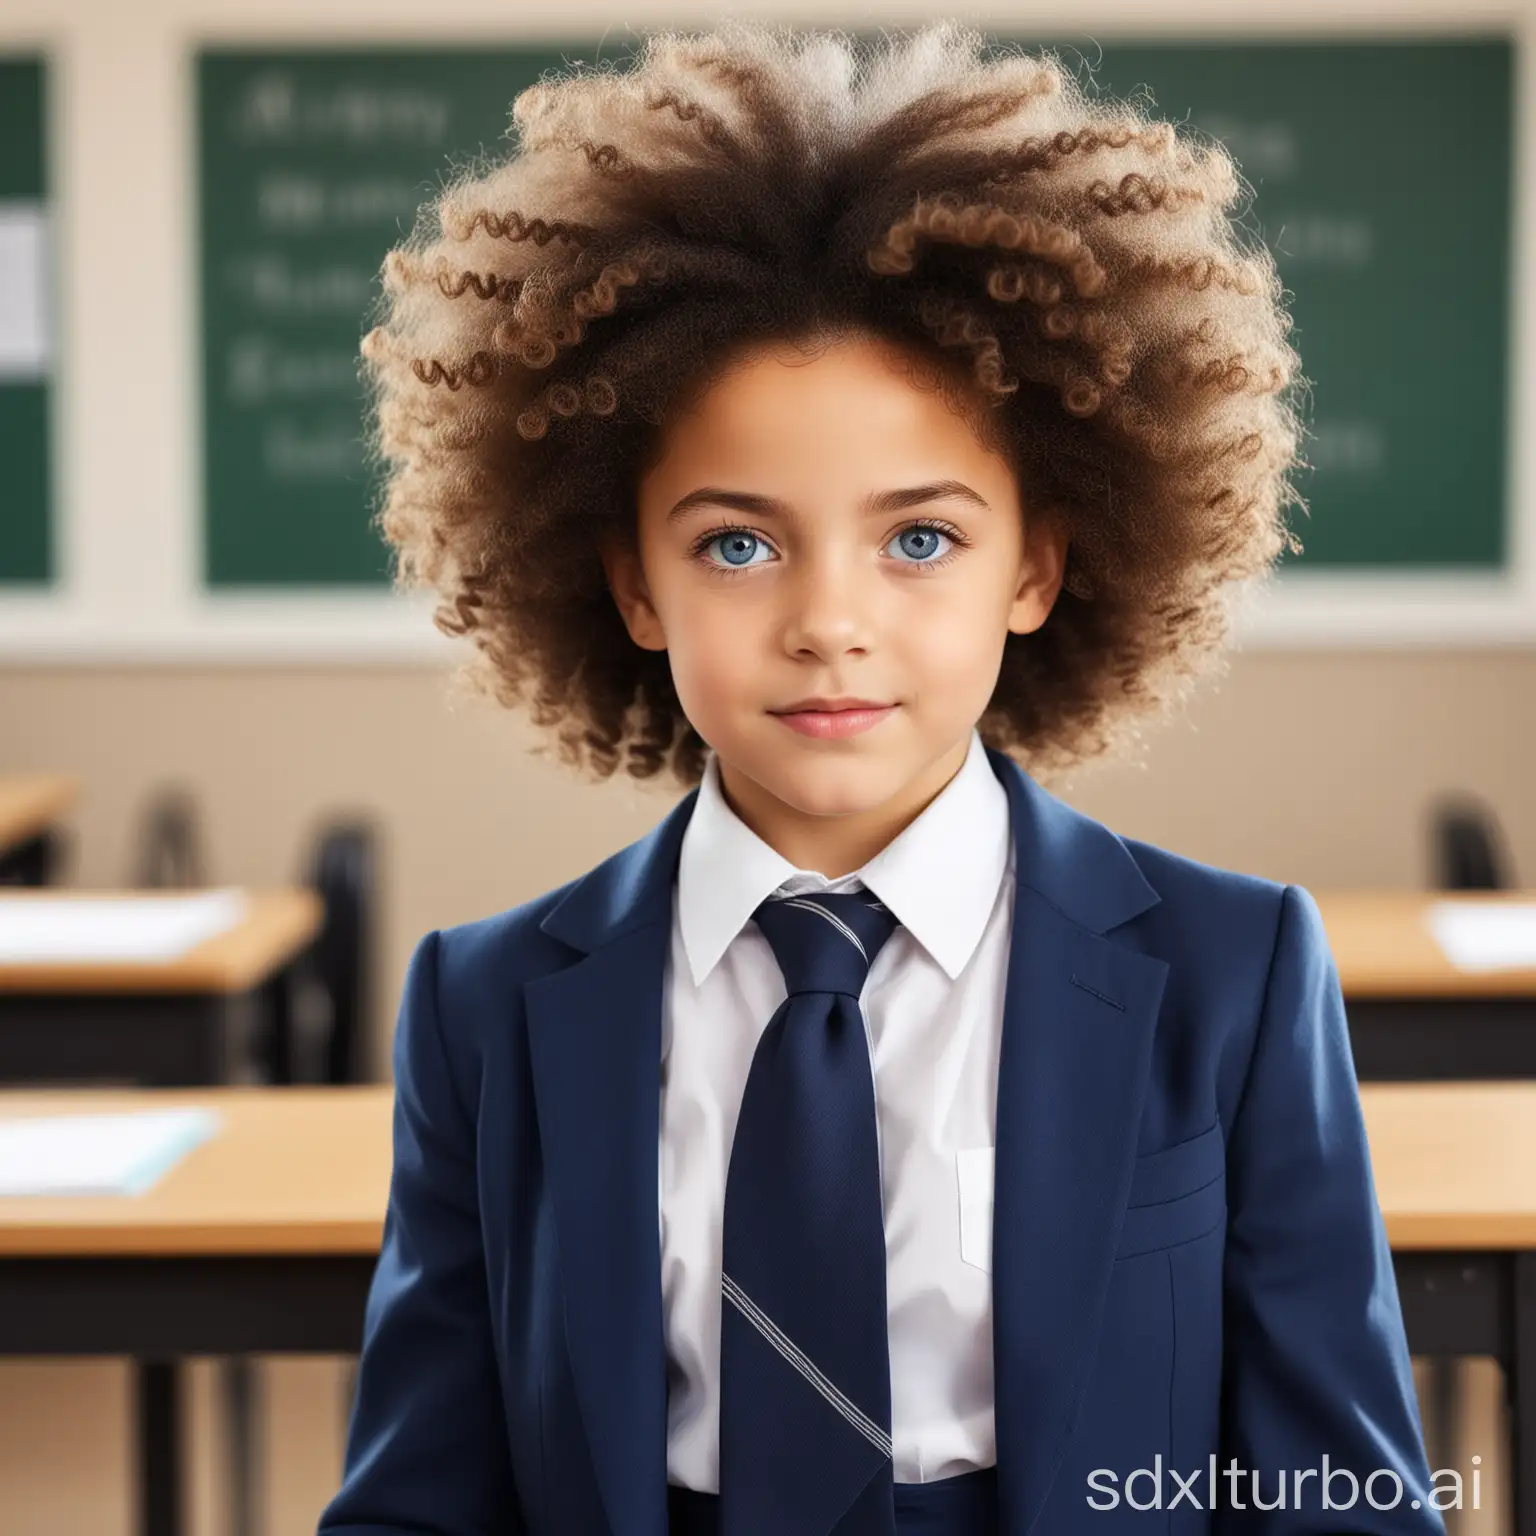 a 7 years old little white most beautiful girl, beautiful in face with brow color hair, exaggerate Afro style hair, blue eyes, wearing a dark blue suit, tie, and skirt in the classroom, back ground is teacher and students in same uniform